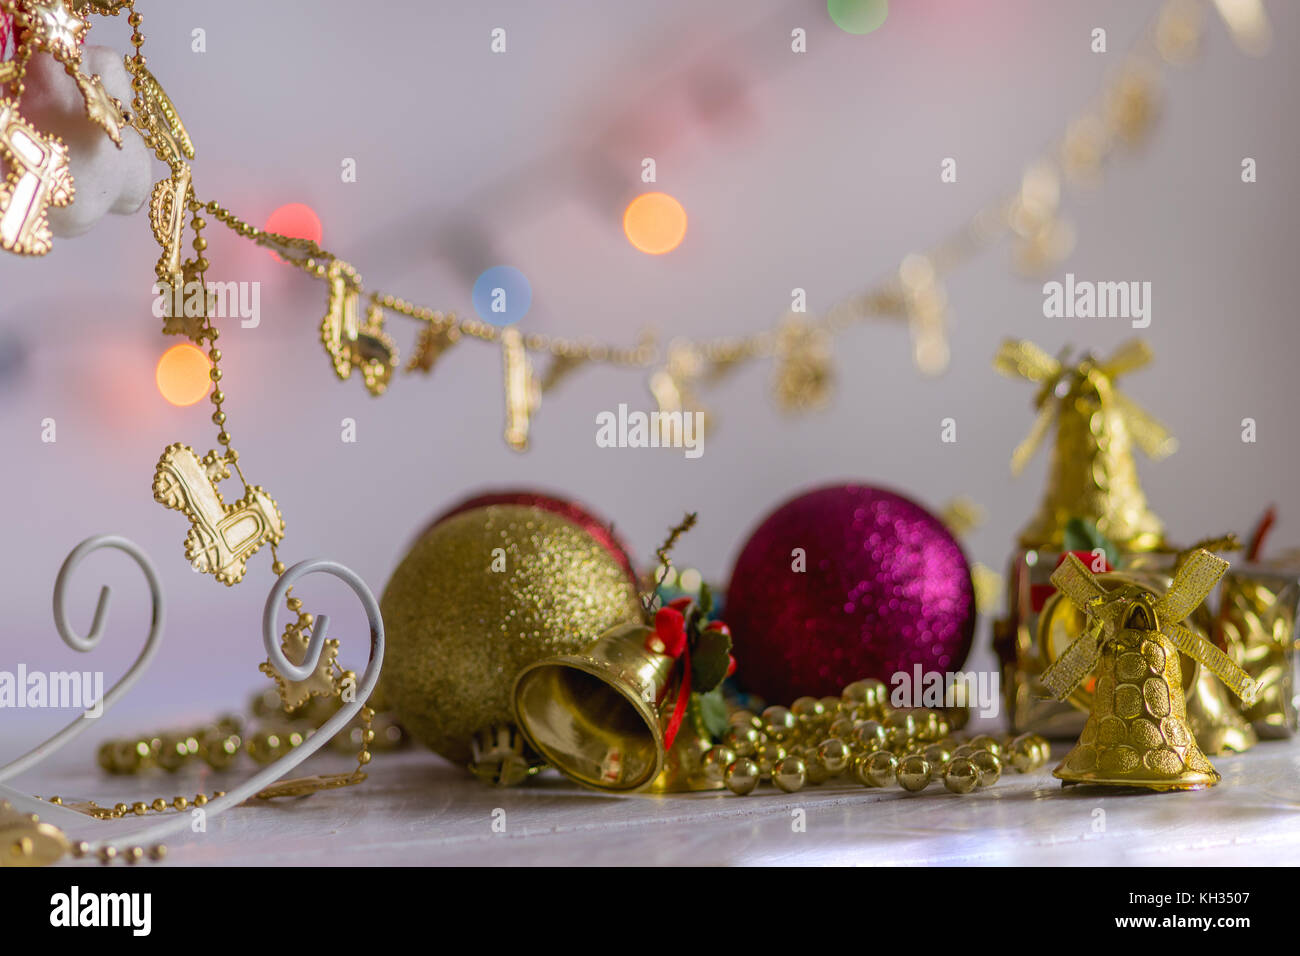 Christmas Decoration, gifts, chains, bells and colorful reflective balls, on top of a white wood surface and white background, with bokeh background Stock Photo